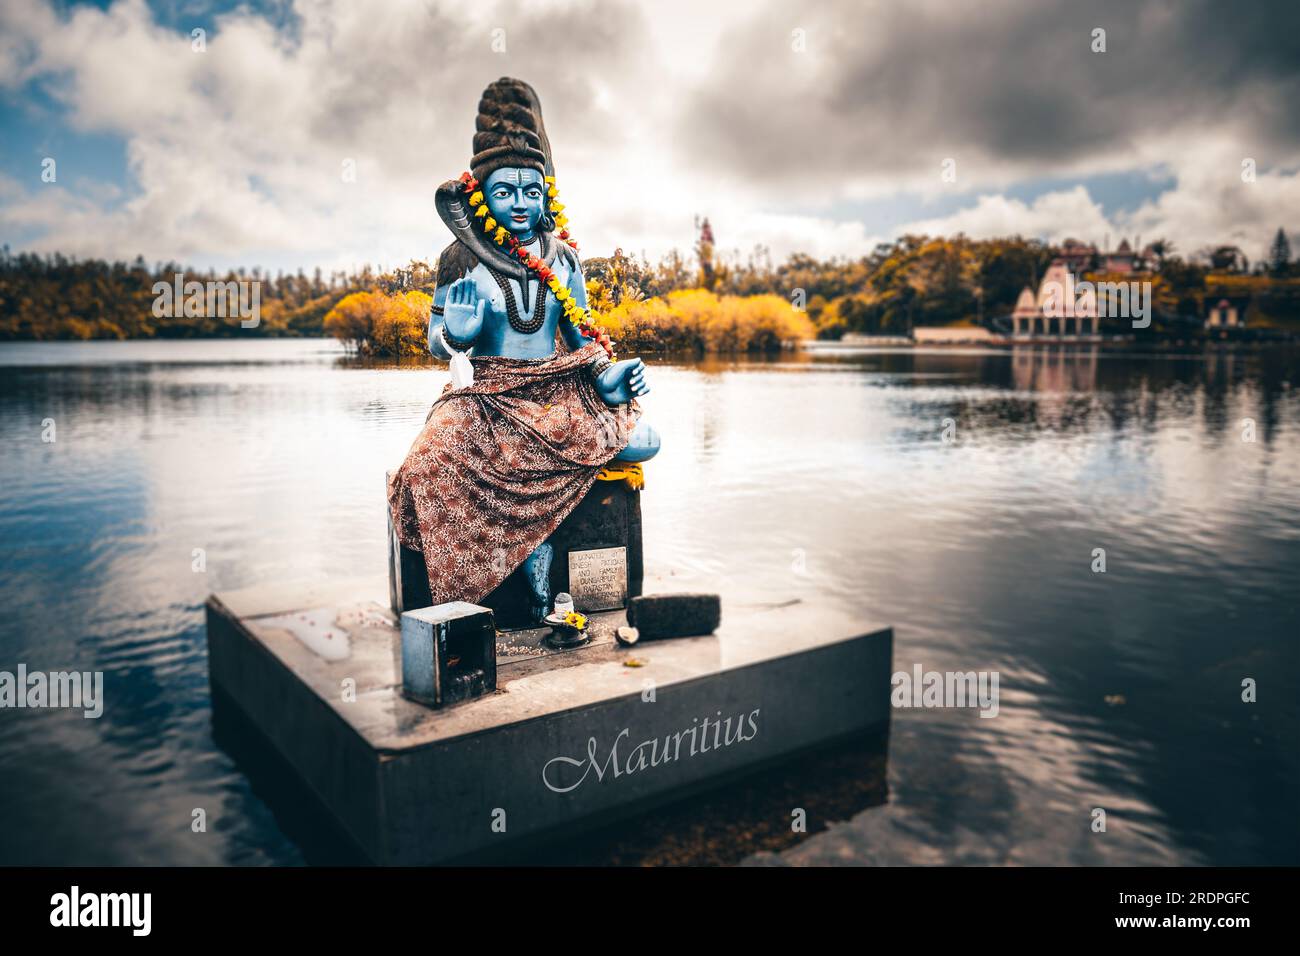 Asian Hindu statue in Mauritius and Bali. Gods temple and water. Worship operas and religion Stock Photo